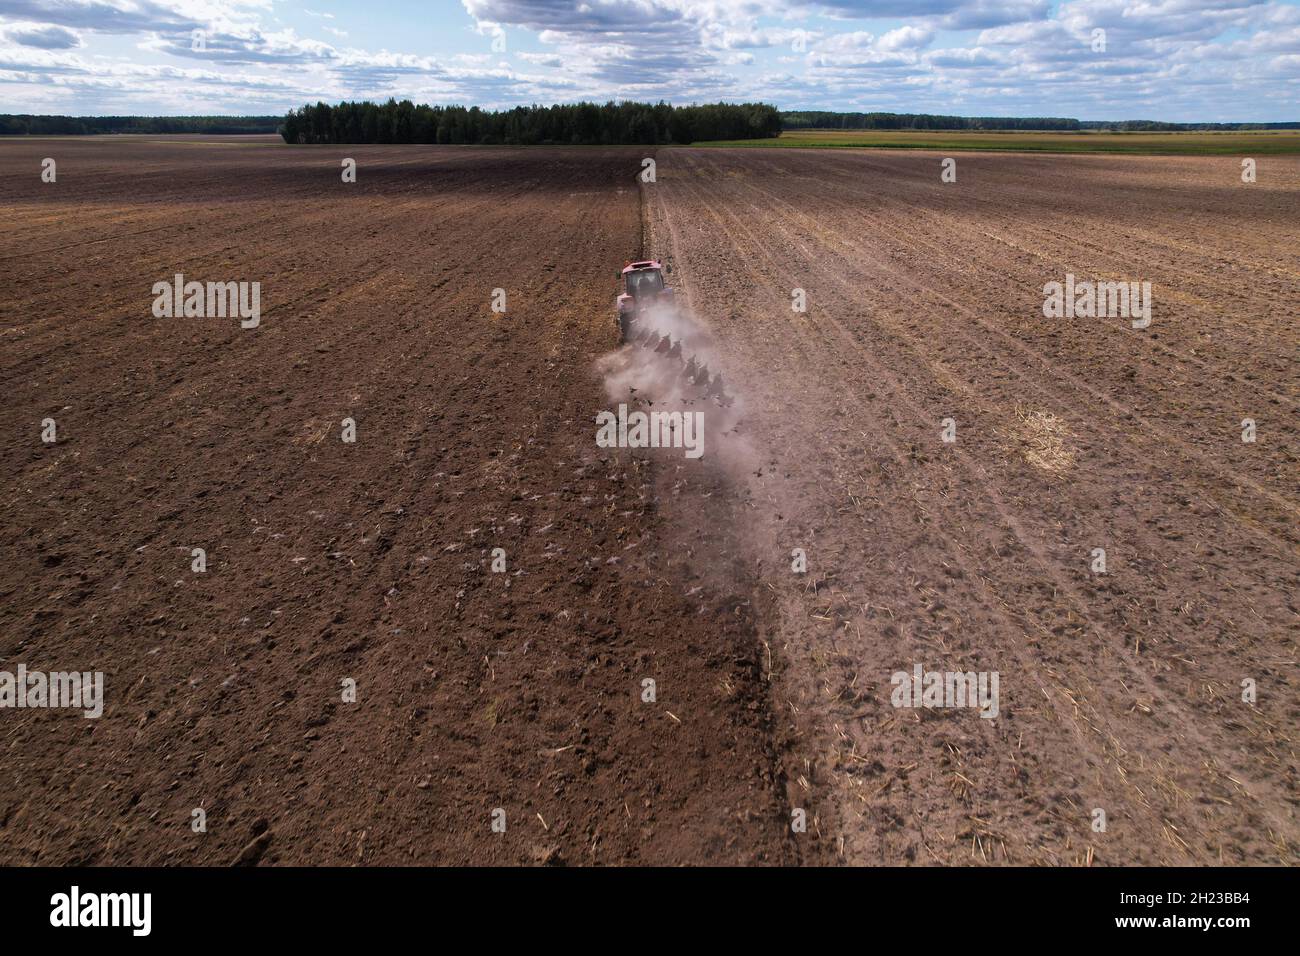 Hungry birds are flying behind a tractor with a plow in search of food. Stock Photo